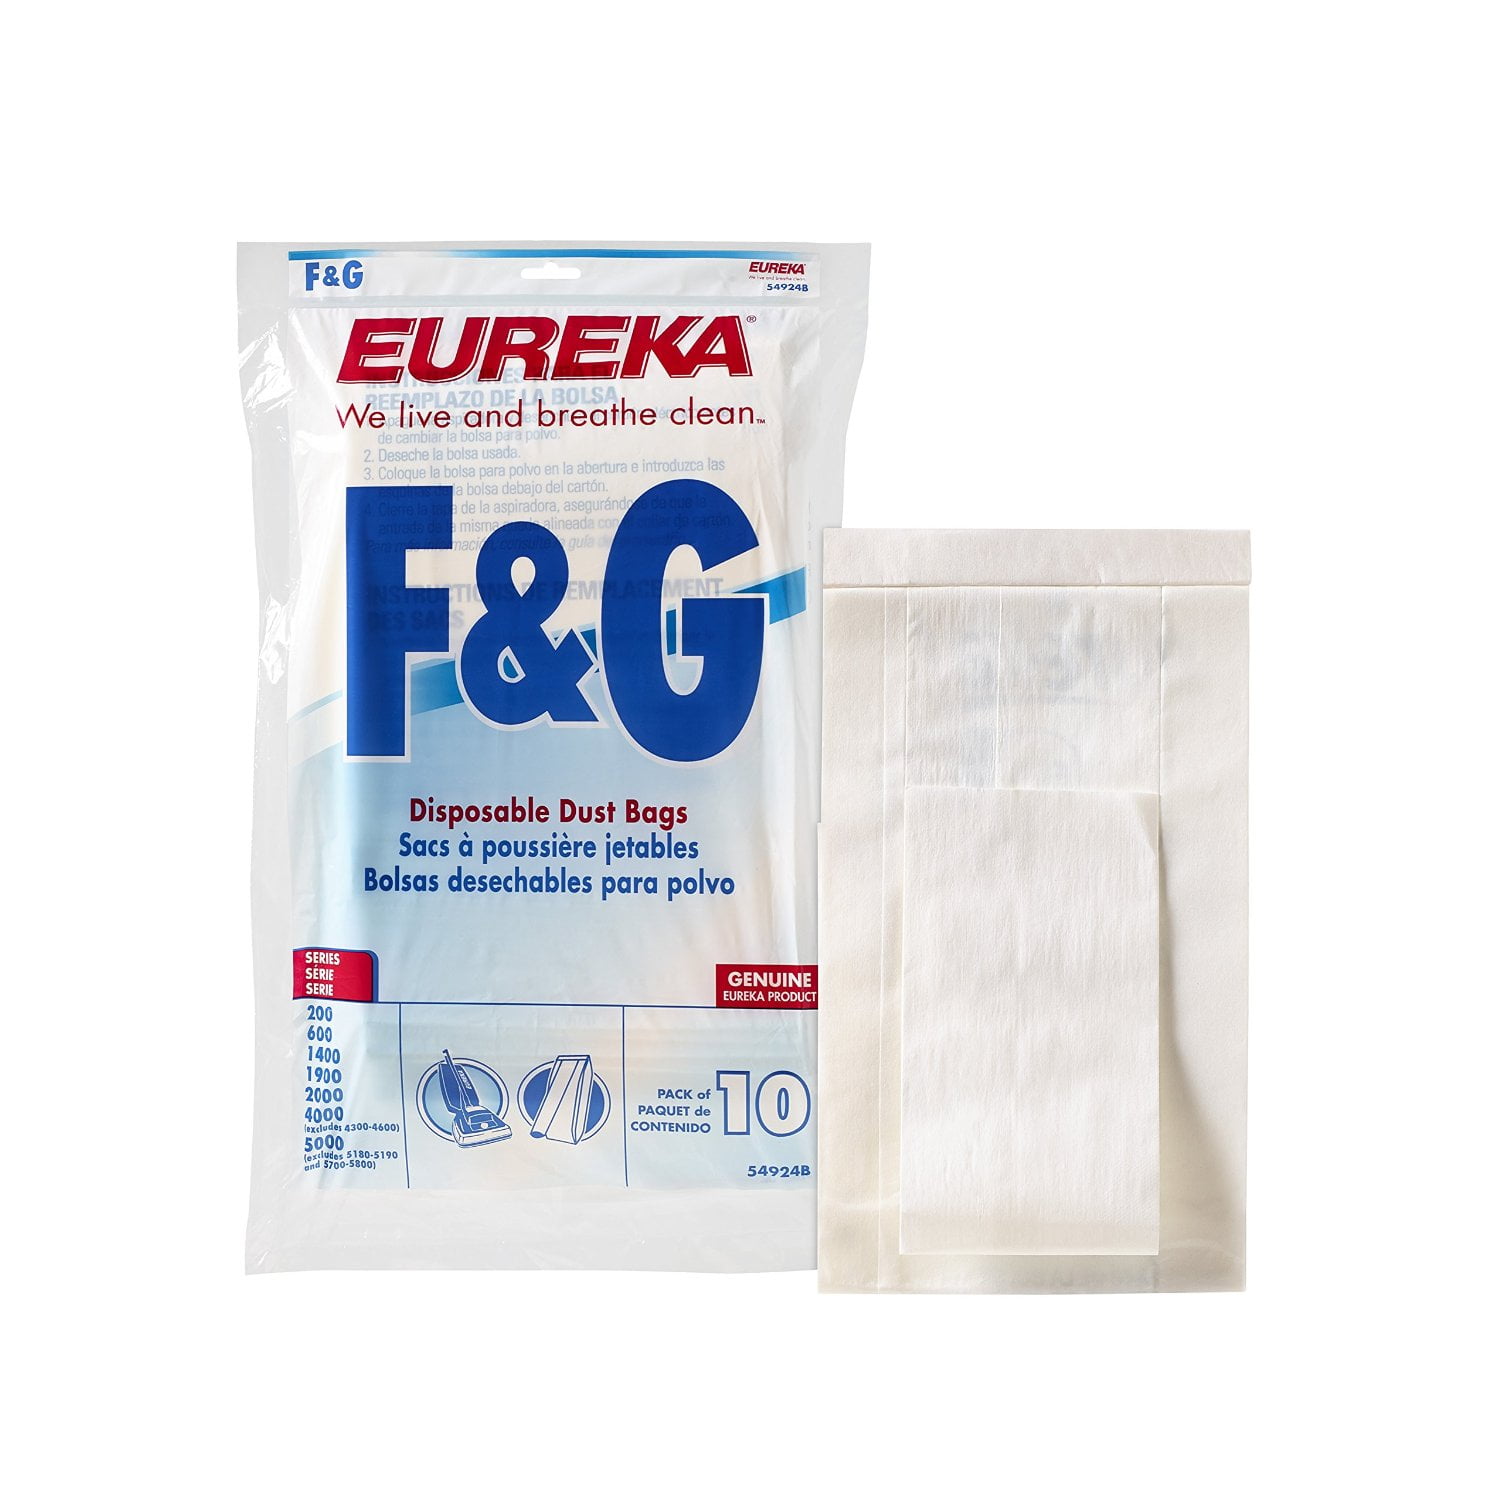 54924A Style F & G 660636 2PLY Upright Vacuum Paper Bags 27 Eureka 216-9SW